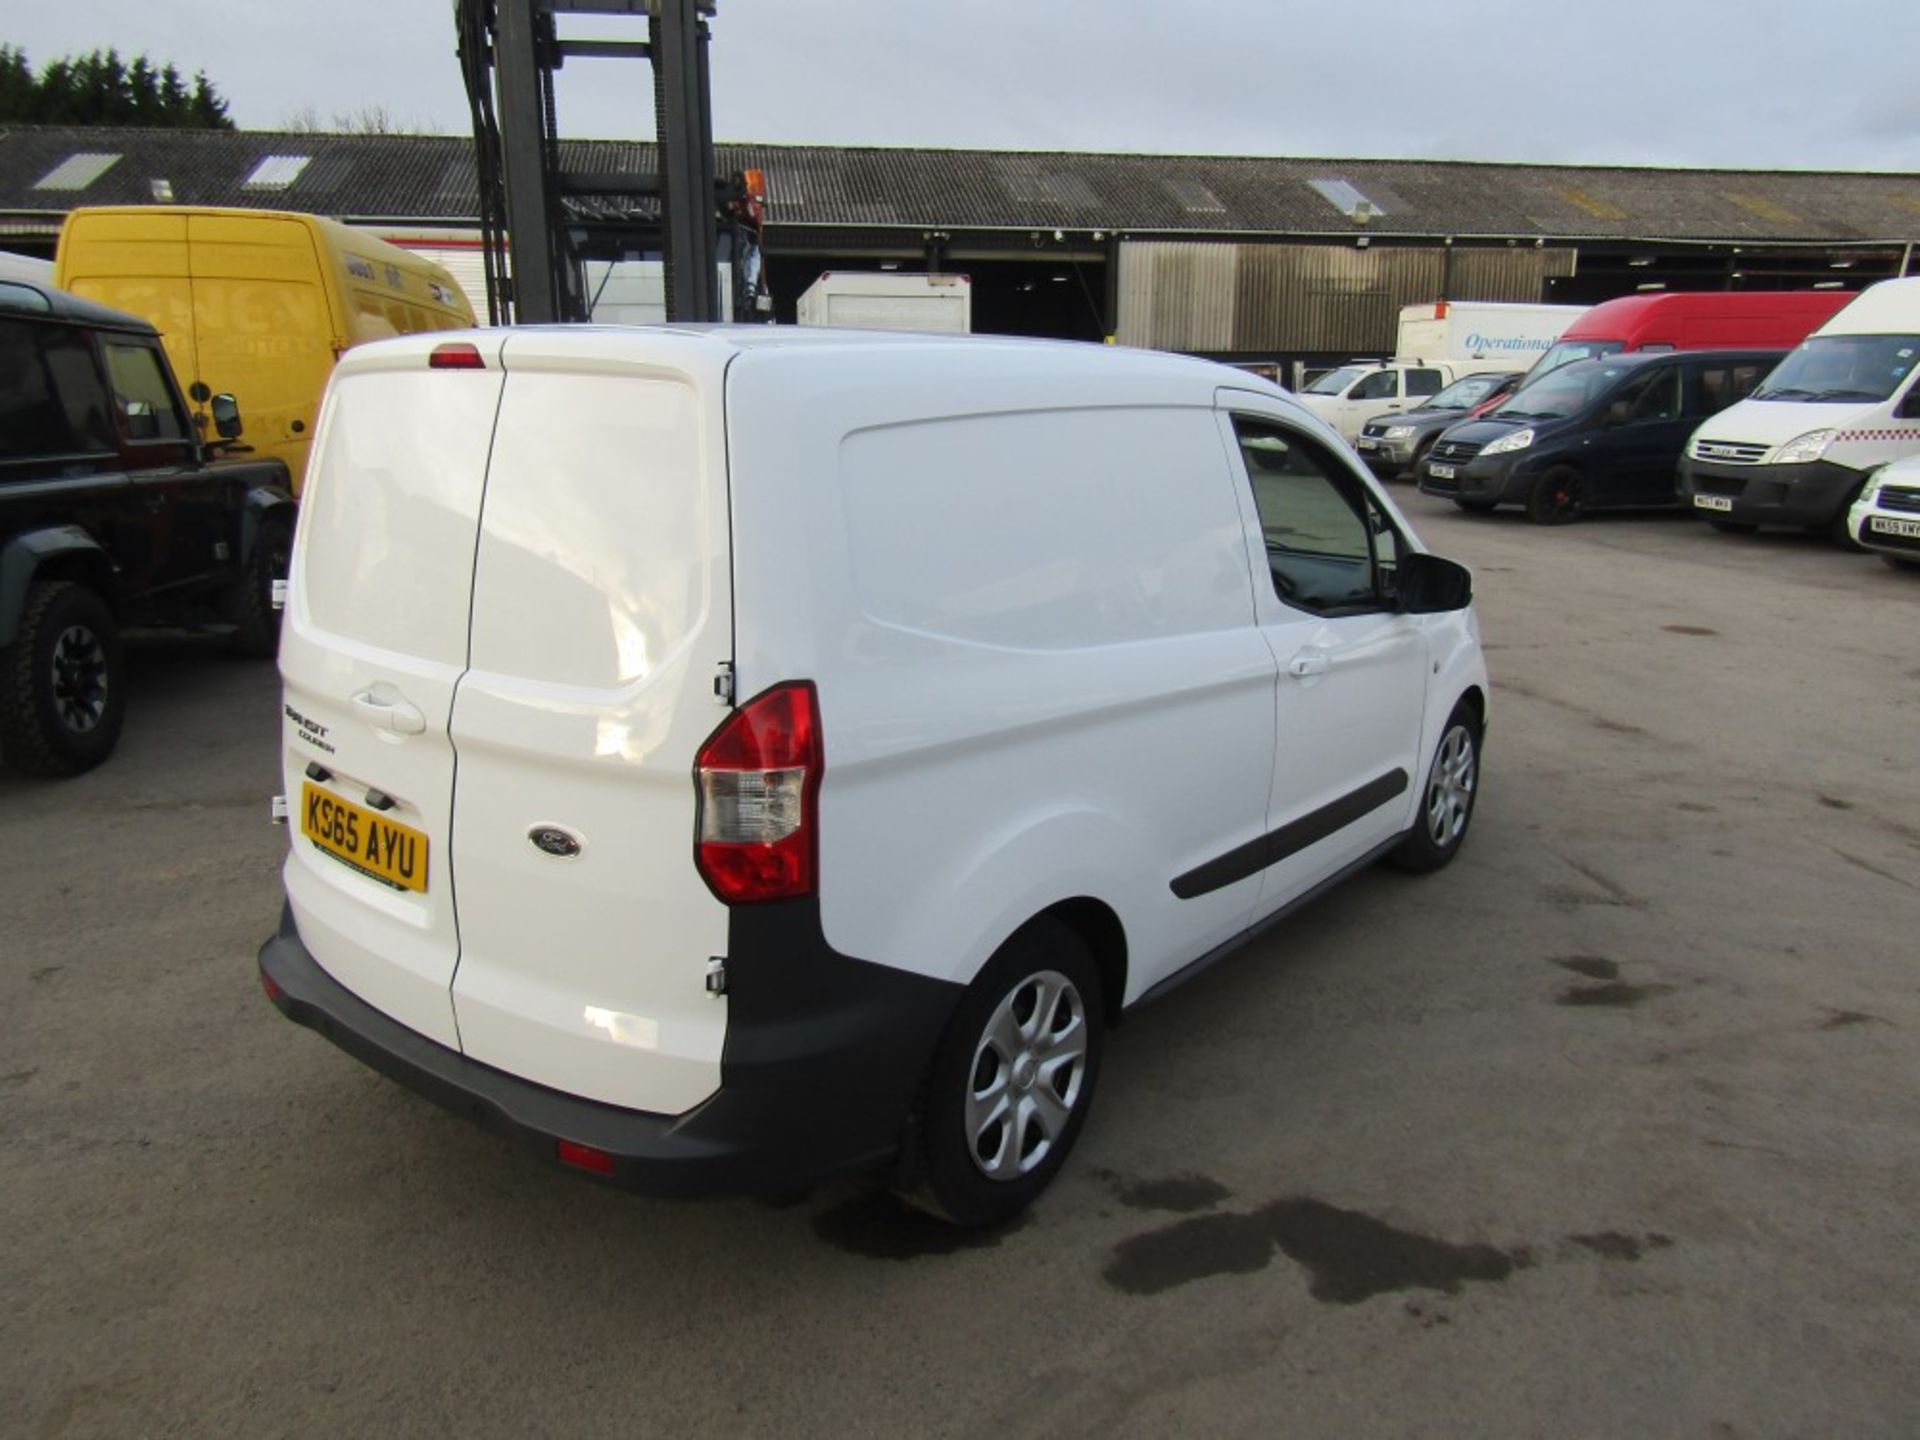 65 reg FORD TRANSIT COURIER TREND TDCI, PLY LINING, BLUETOOTH, 4 SERVICE BOOK STAMPS, 1ST REG - Image 4 of 7